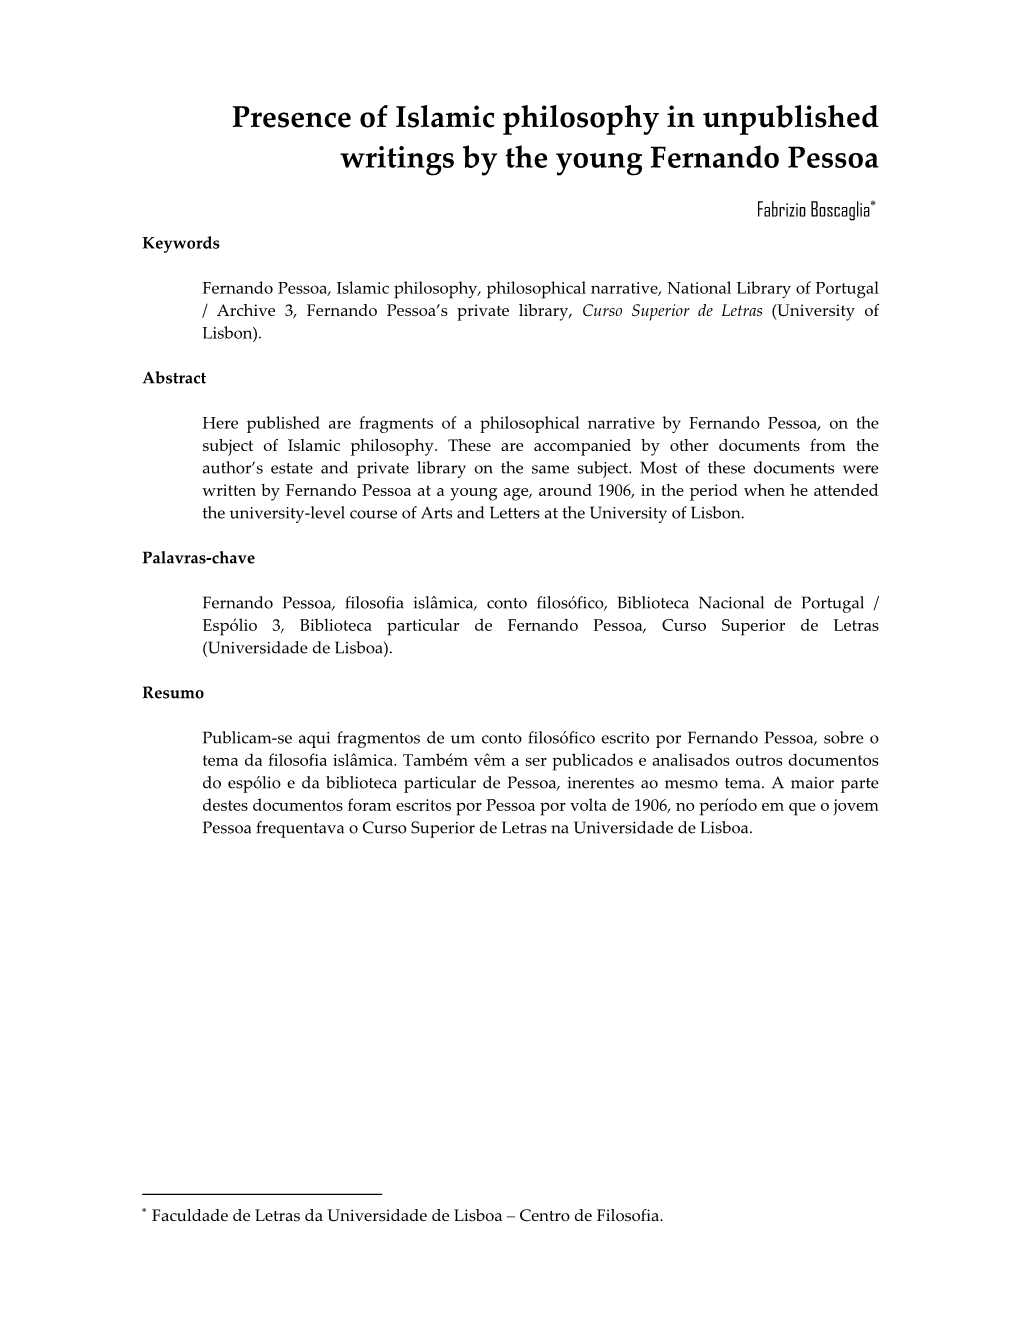 Presence of Islamic Philosophy in Unpublished Writings by the Young Fernando Pessoa